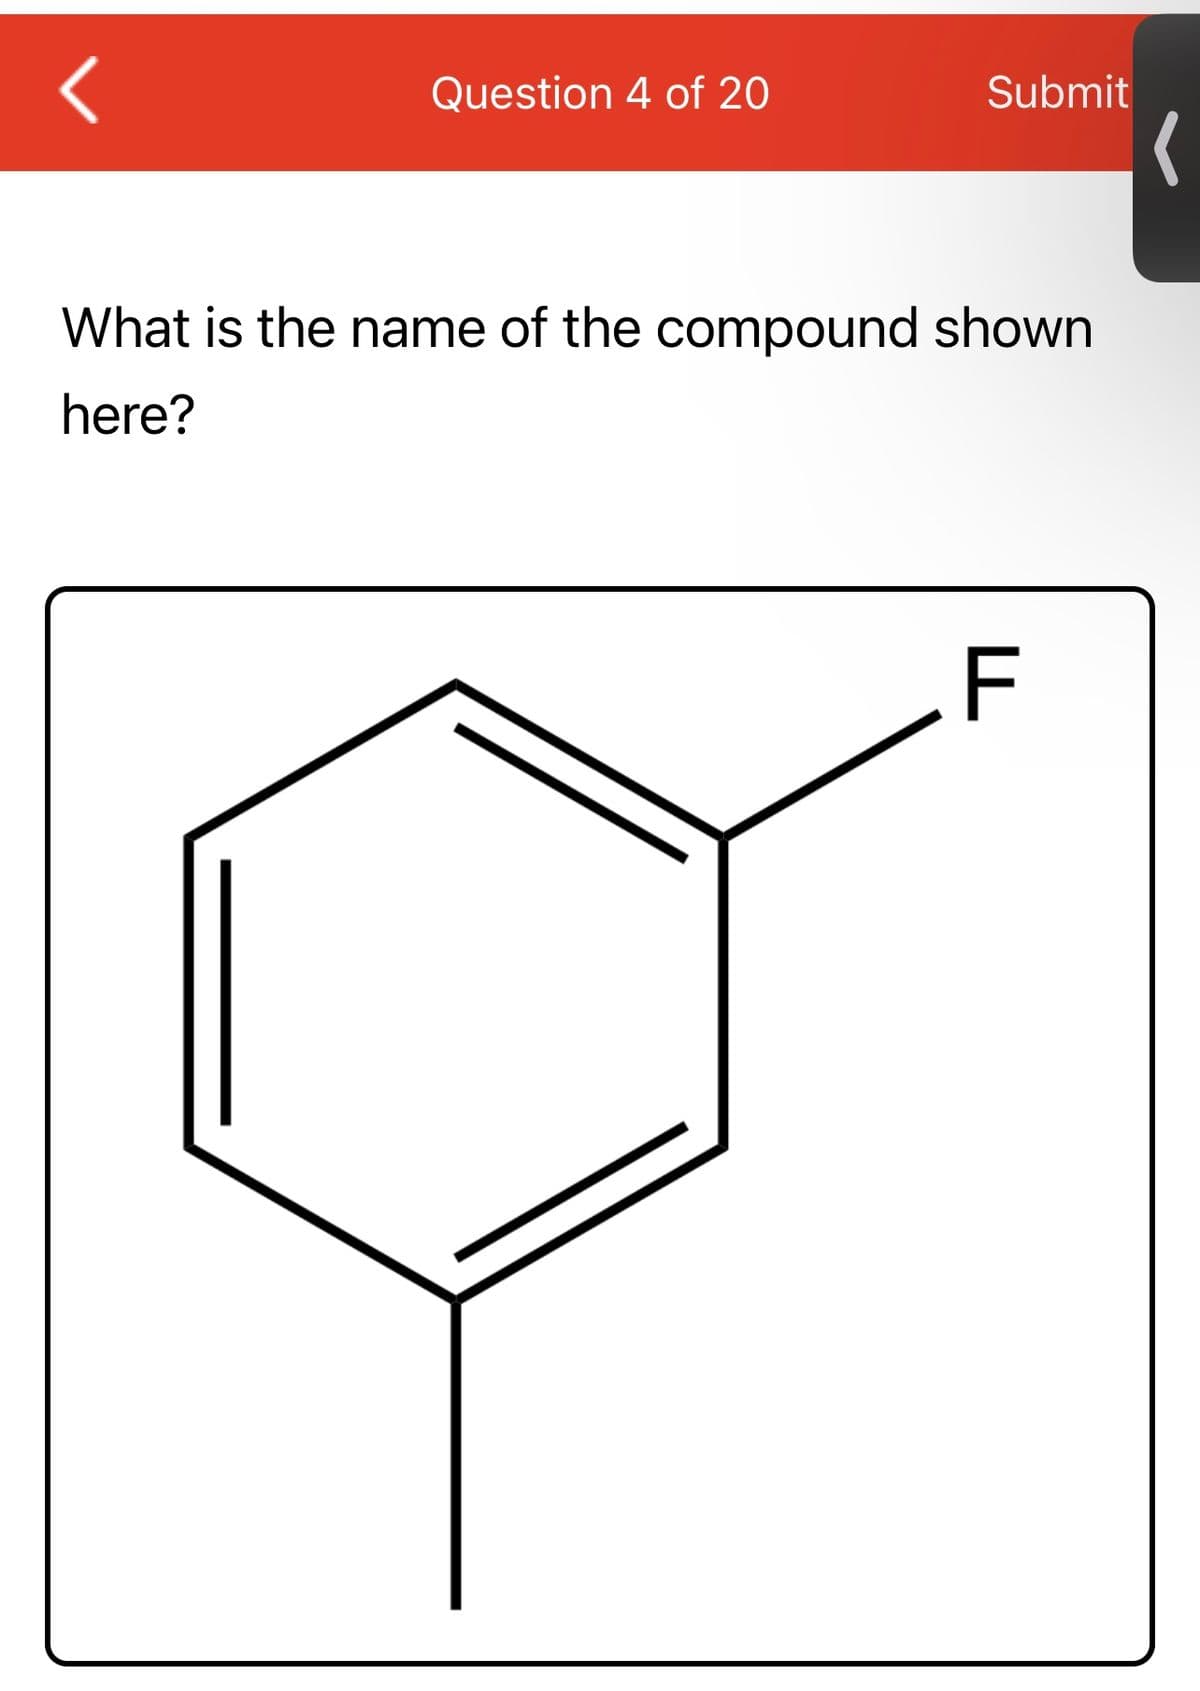 <
Question 4 of 20
Submit
What is the name of the compound shown
here?
F